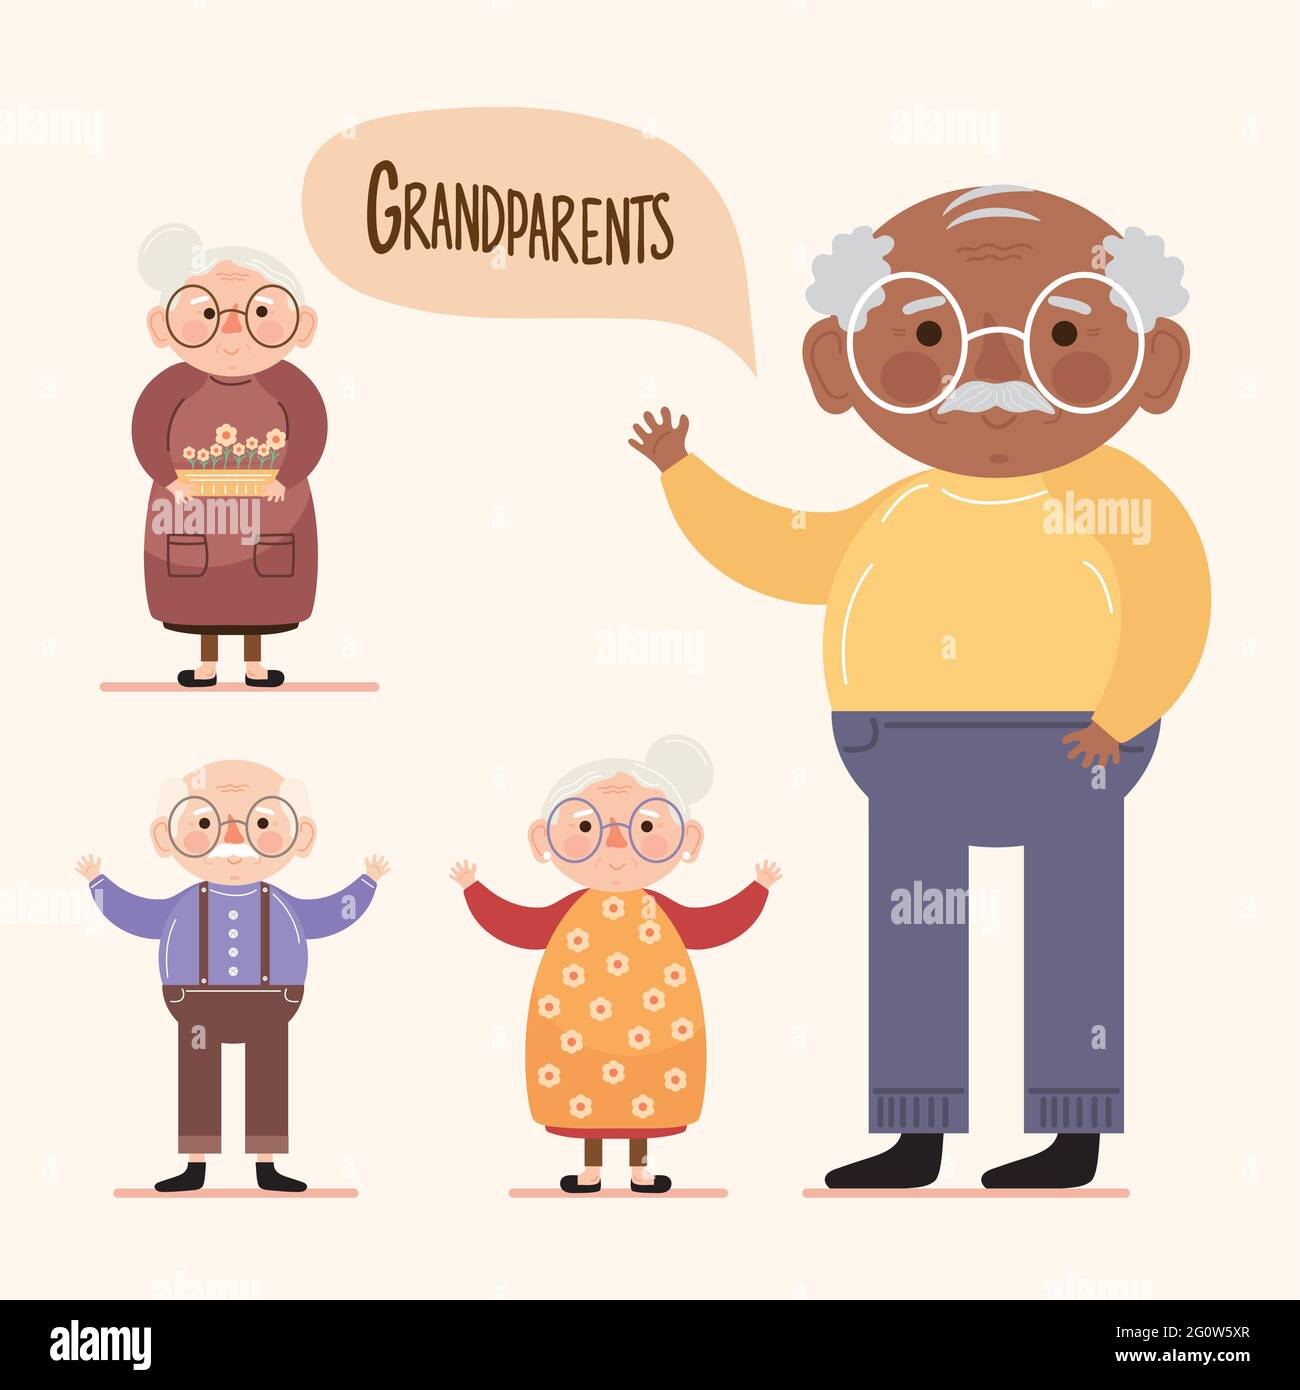 four grandparents characters Stock Vector